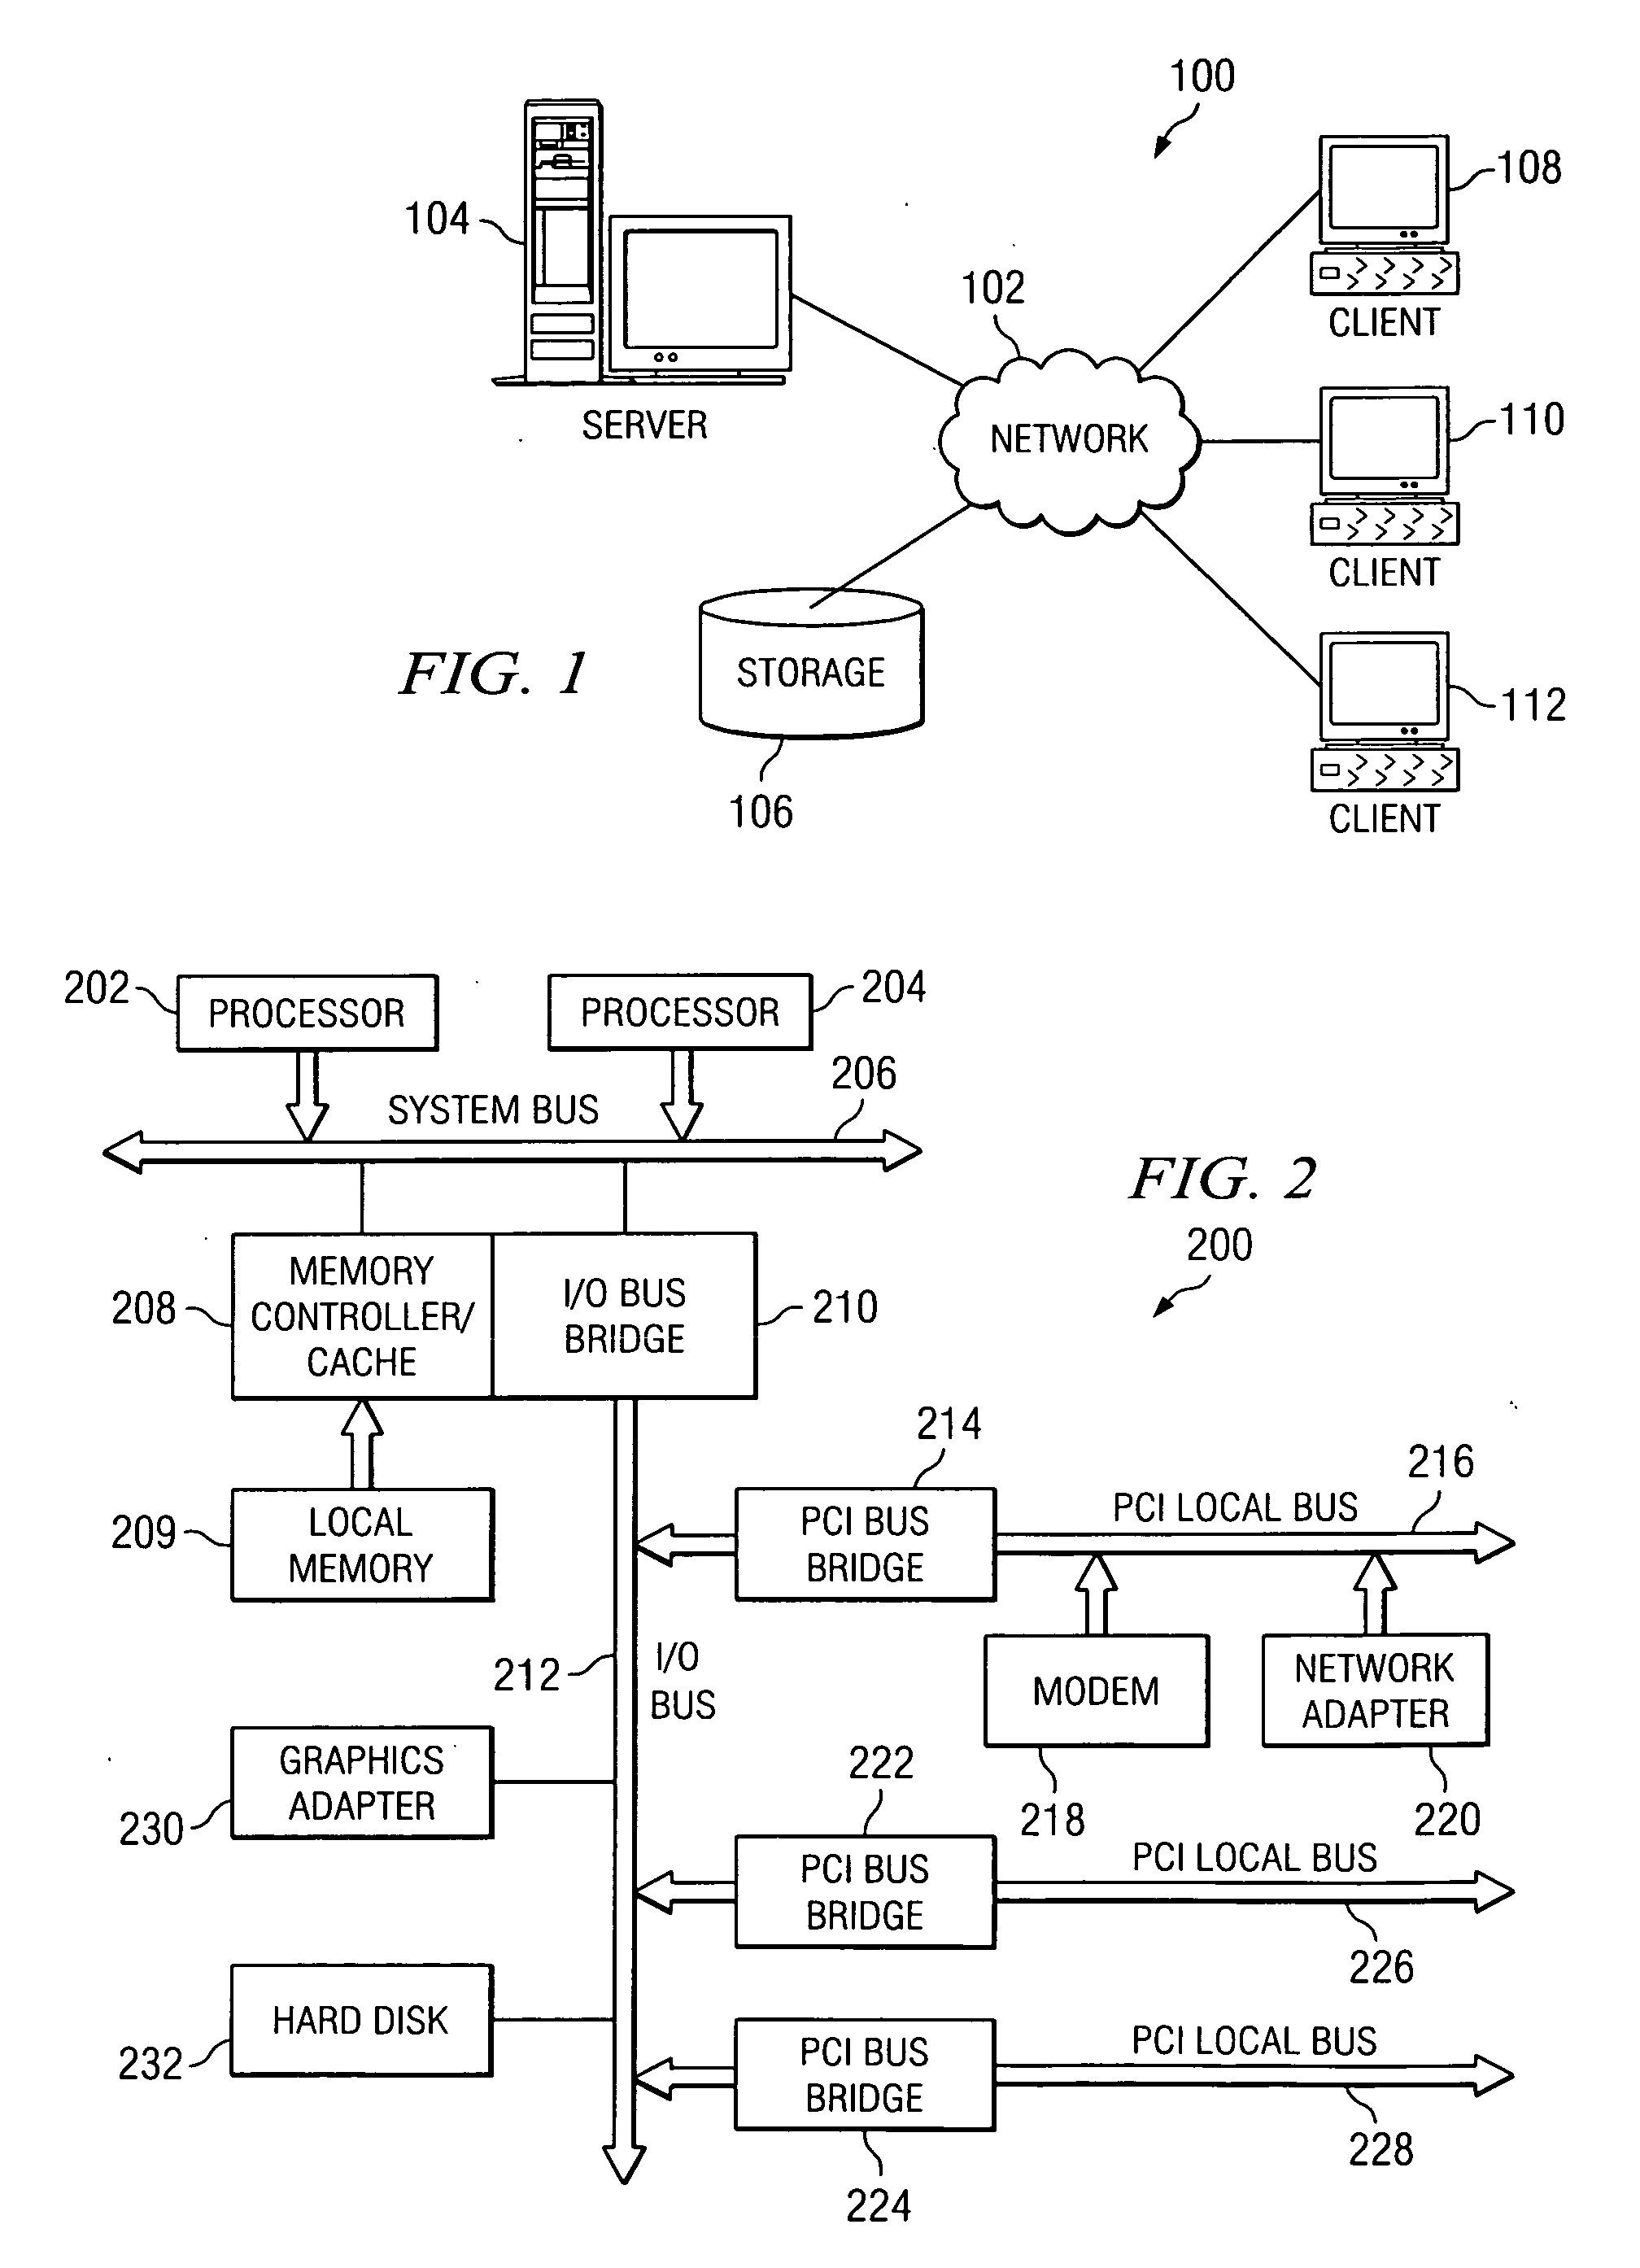 Method and apparatus for mapping web services definition language files to application specific business objects in an integrated application environment